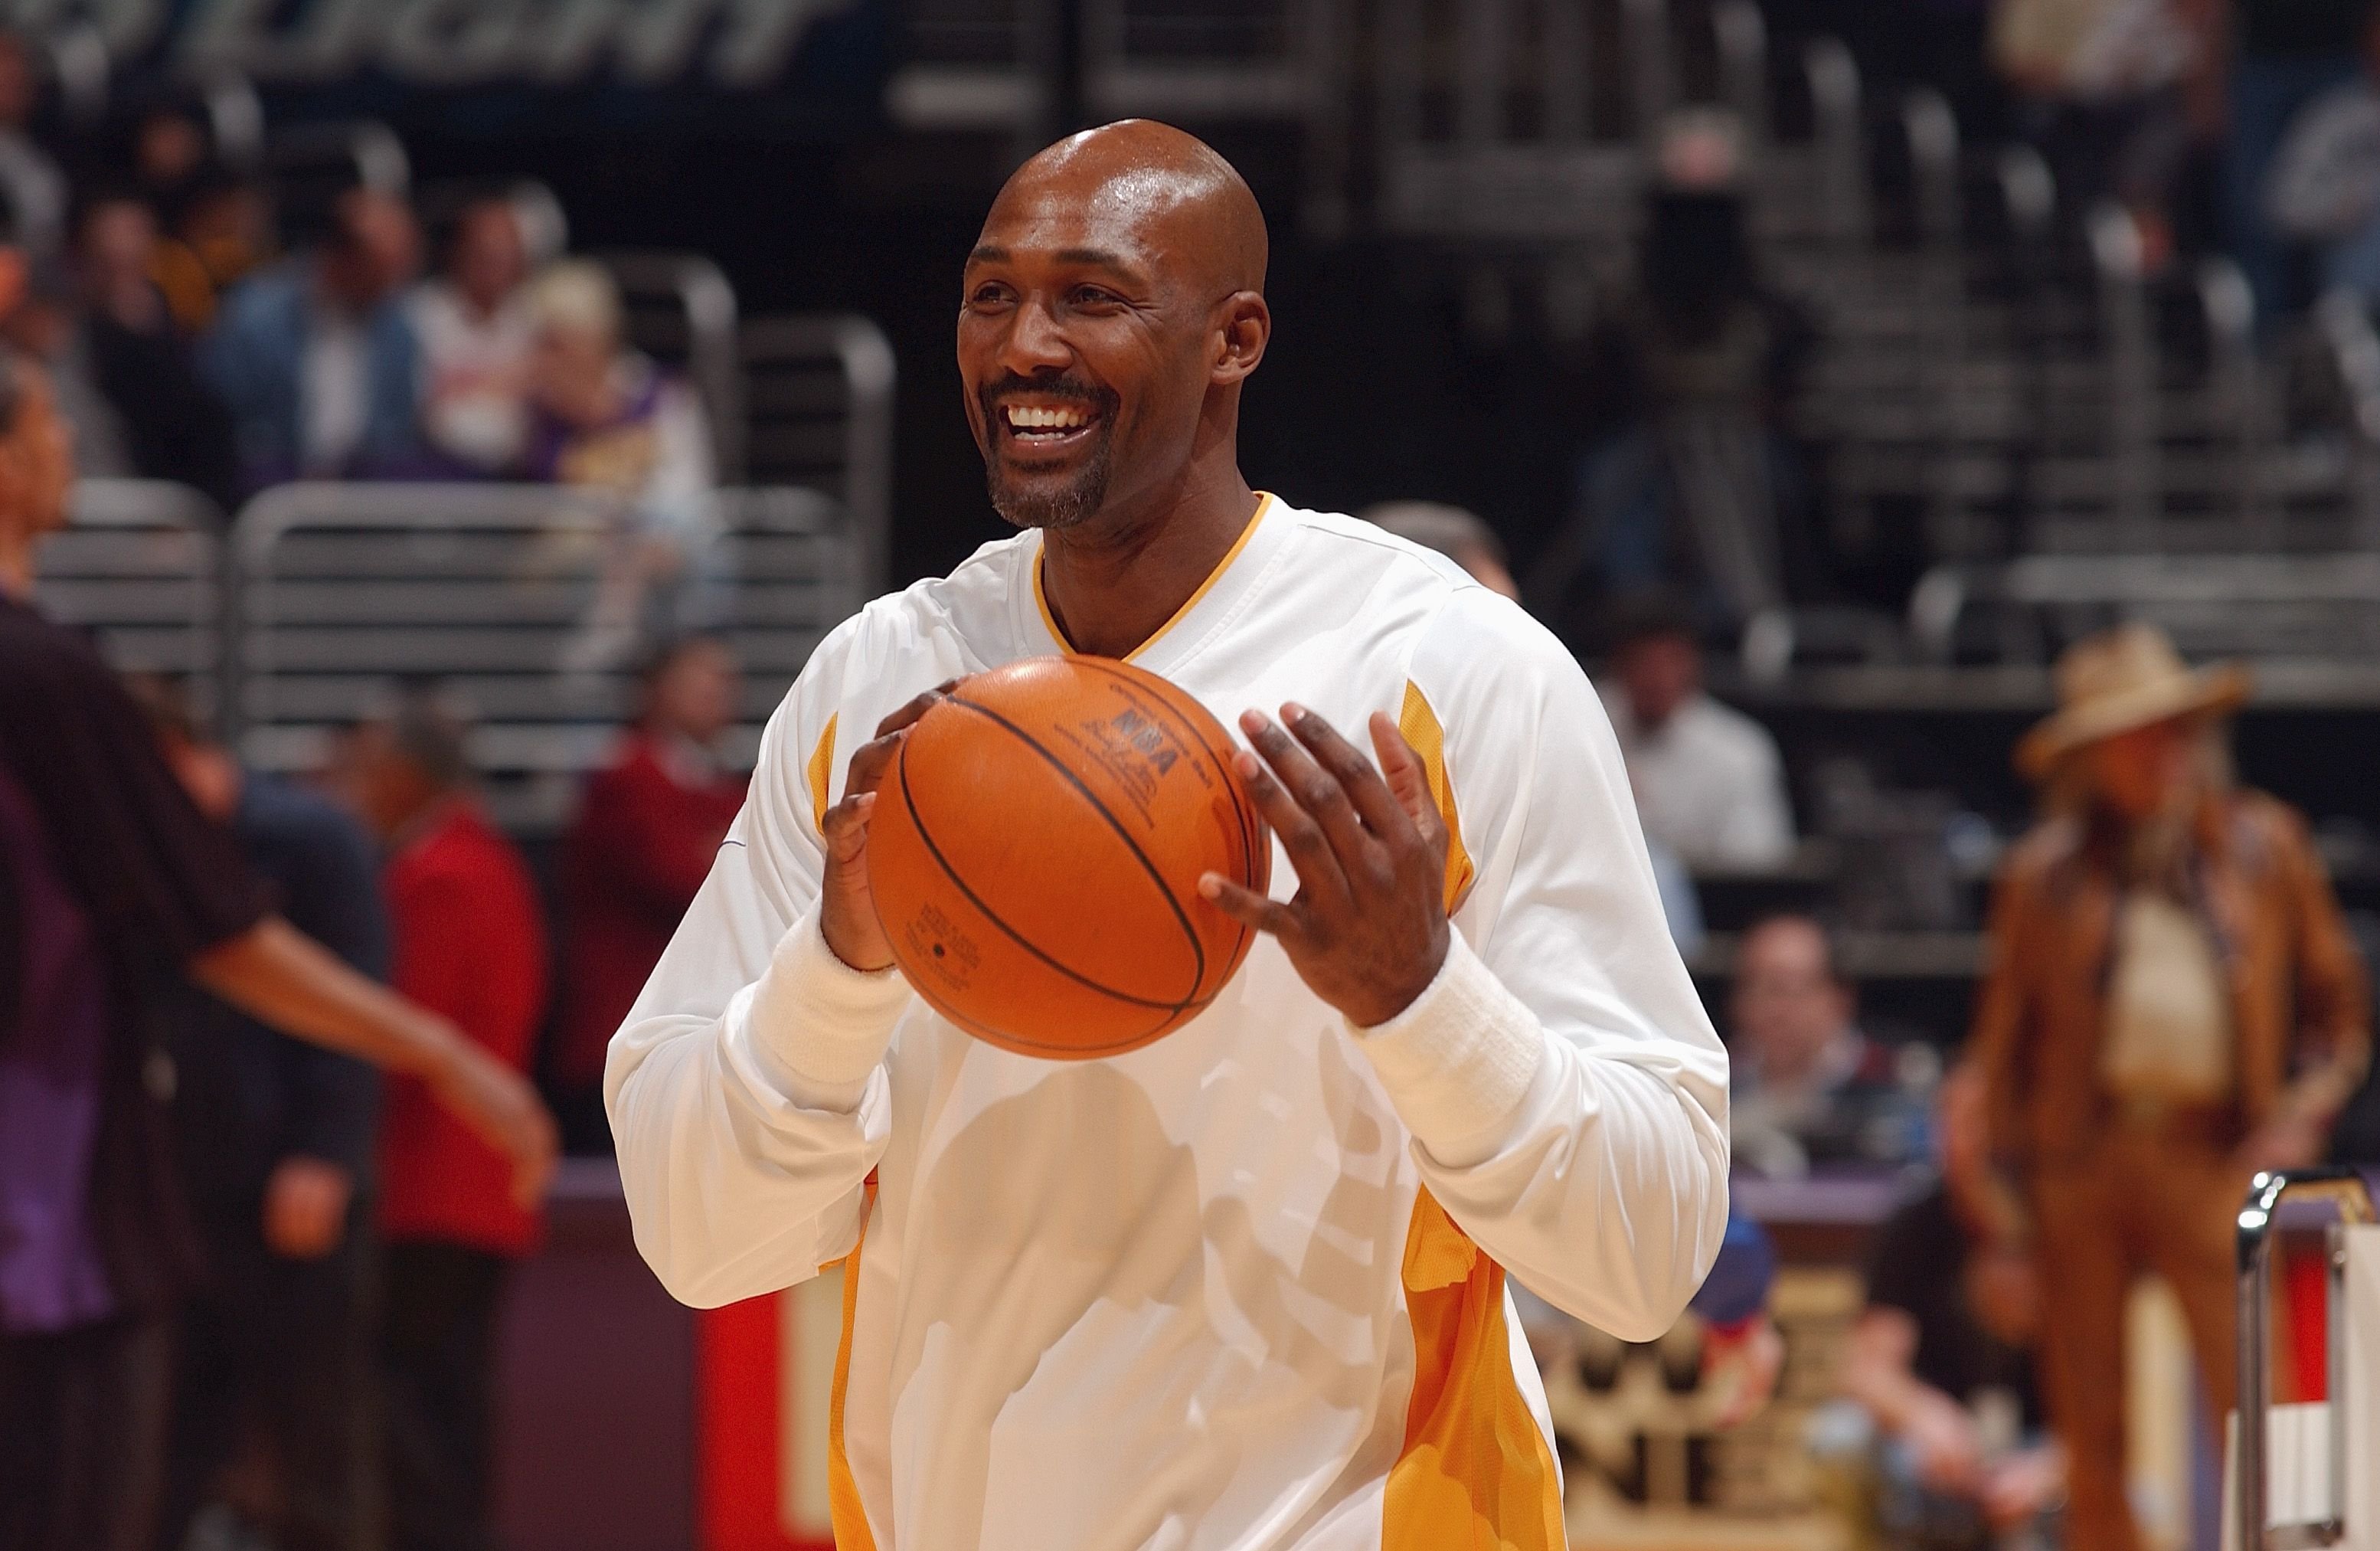 Karl Malone #11 of the Los Angeles Lakers smiles during the game against the Utah Jazz at Staples Center on March 28, 2004 in Los Angeles, California. | Source: Getty Images